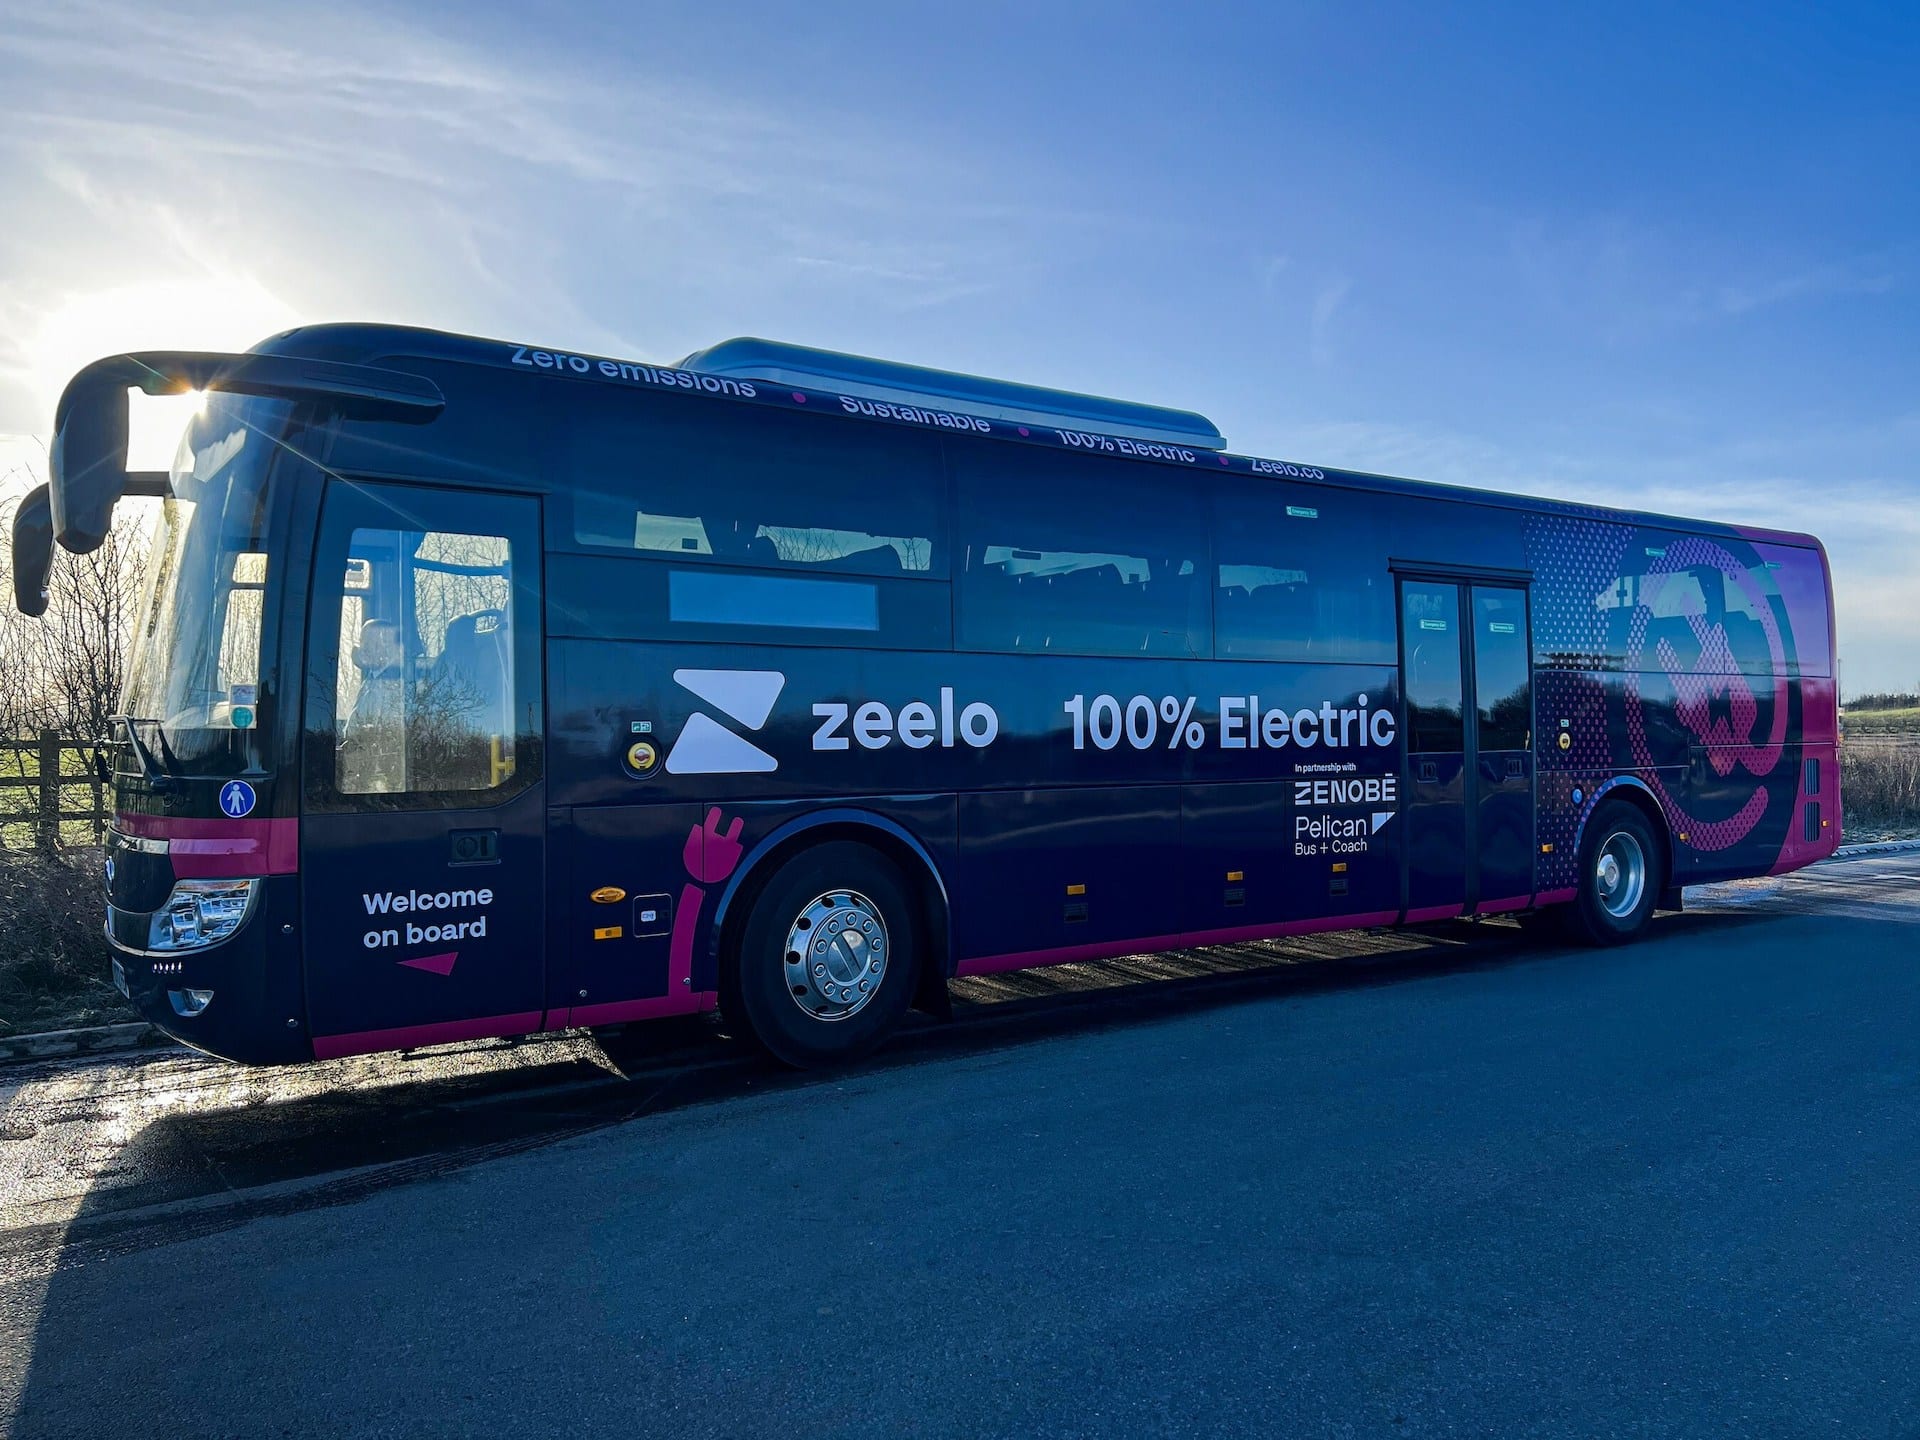 ASOS to Trial Electric Bus Commutes with Zeelo